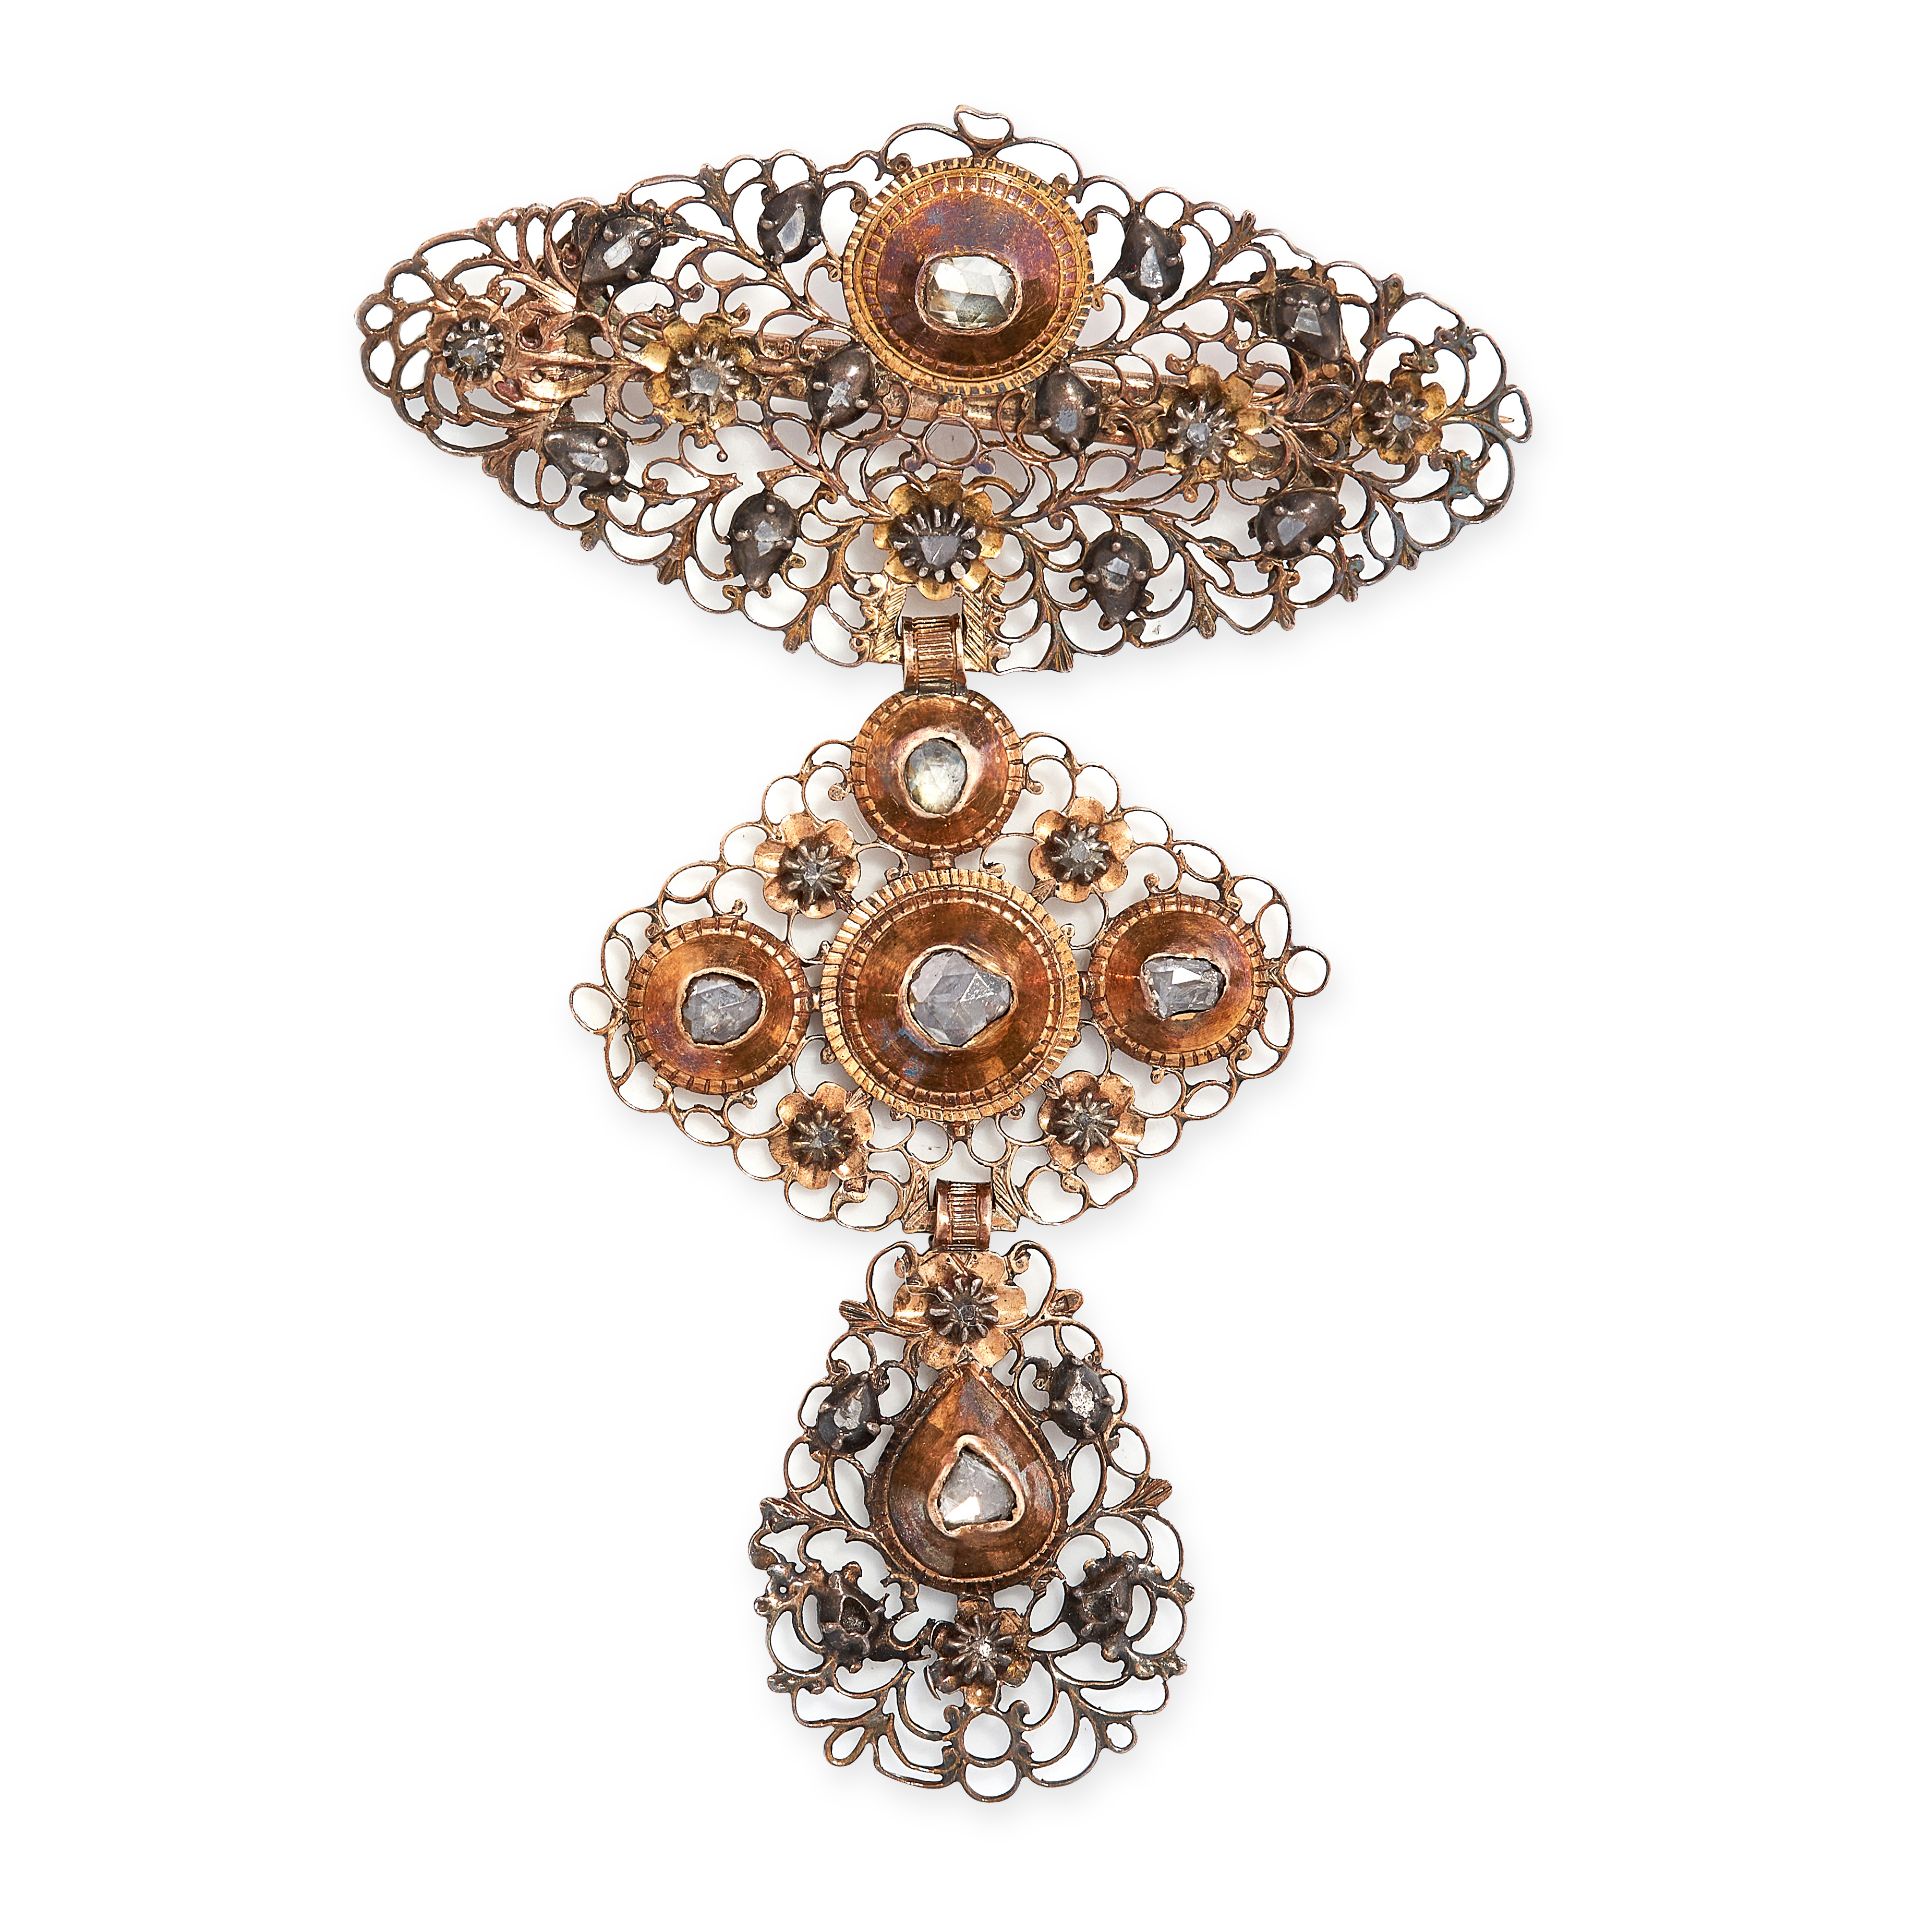 AN ANTIQUE IBERIAN DIAMOND BROOCH, LATE 18TH CENTURY in yellow gold and silver, the articulated body